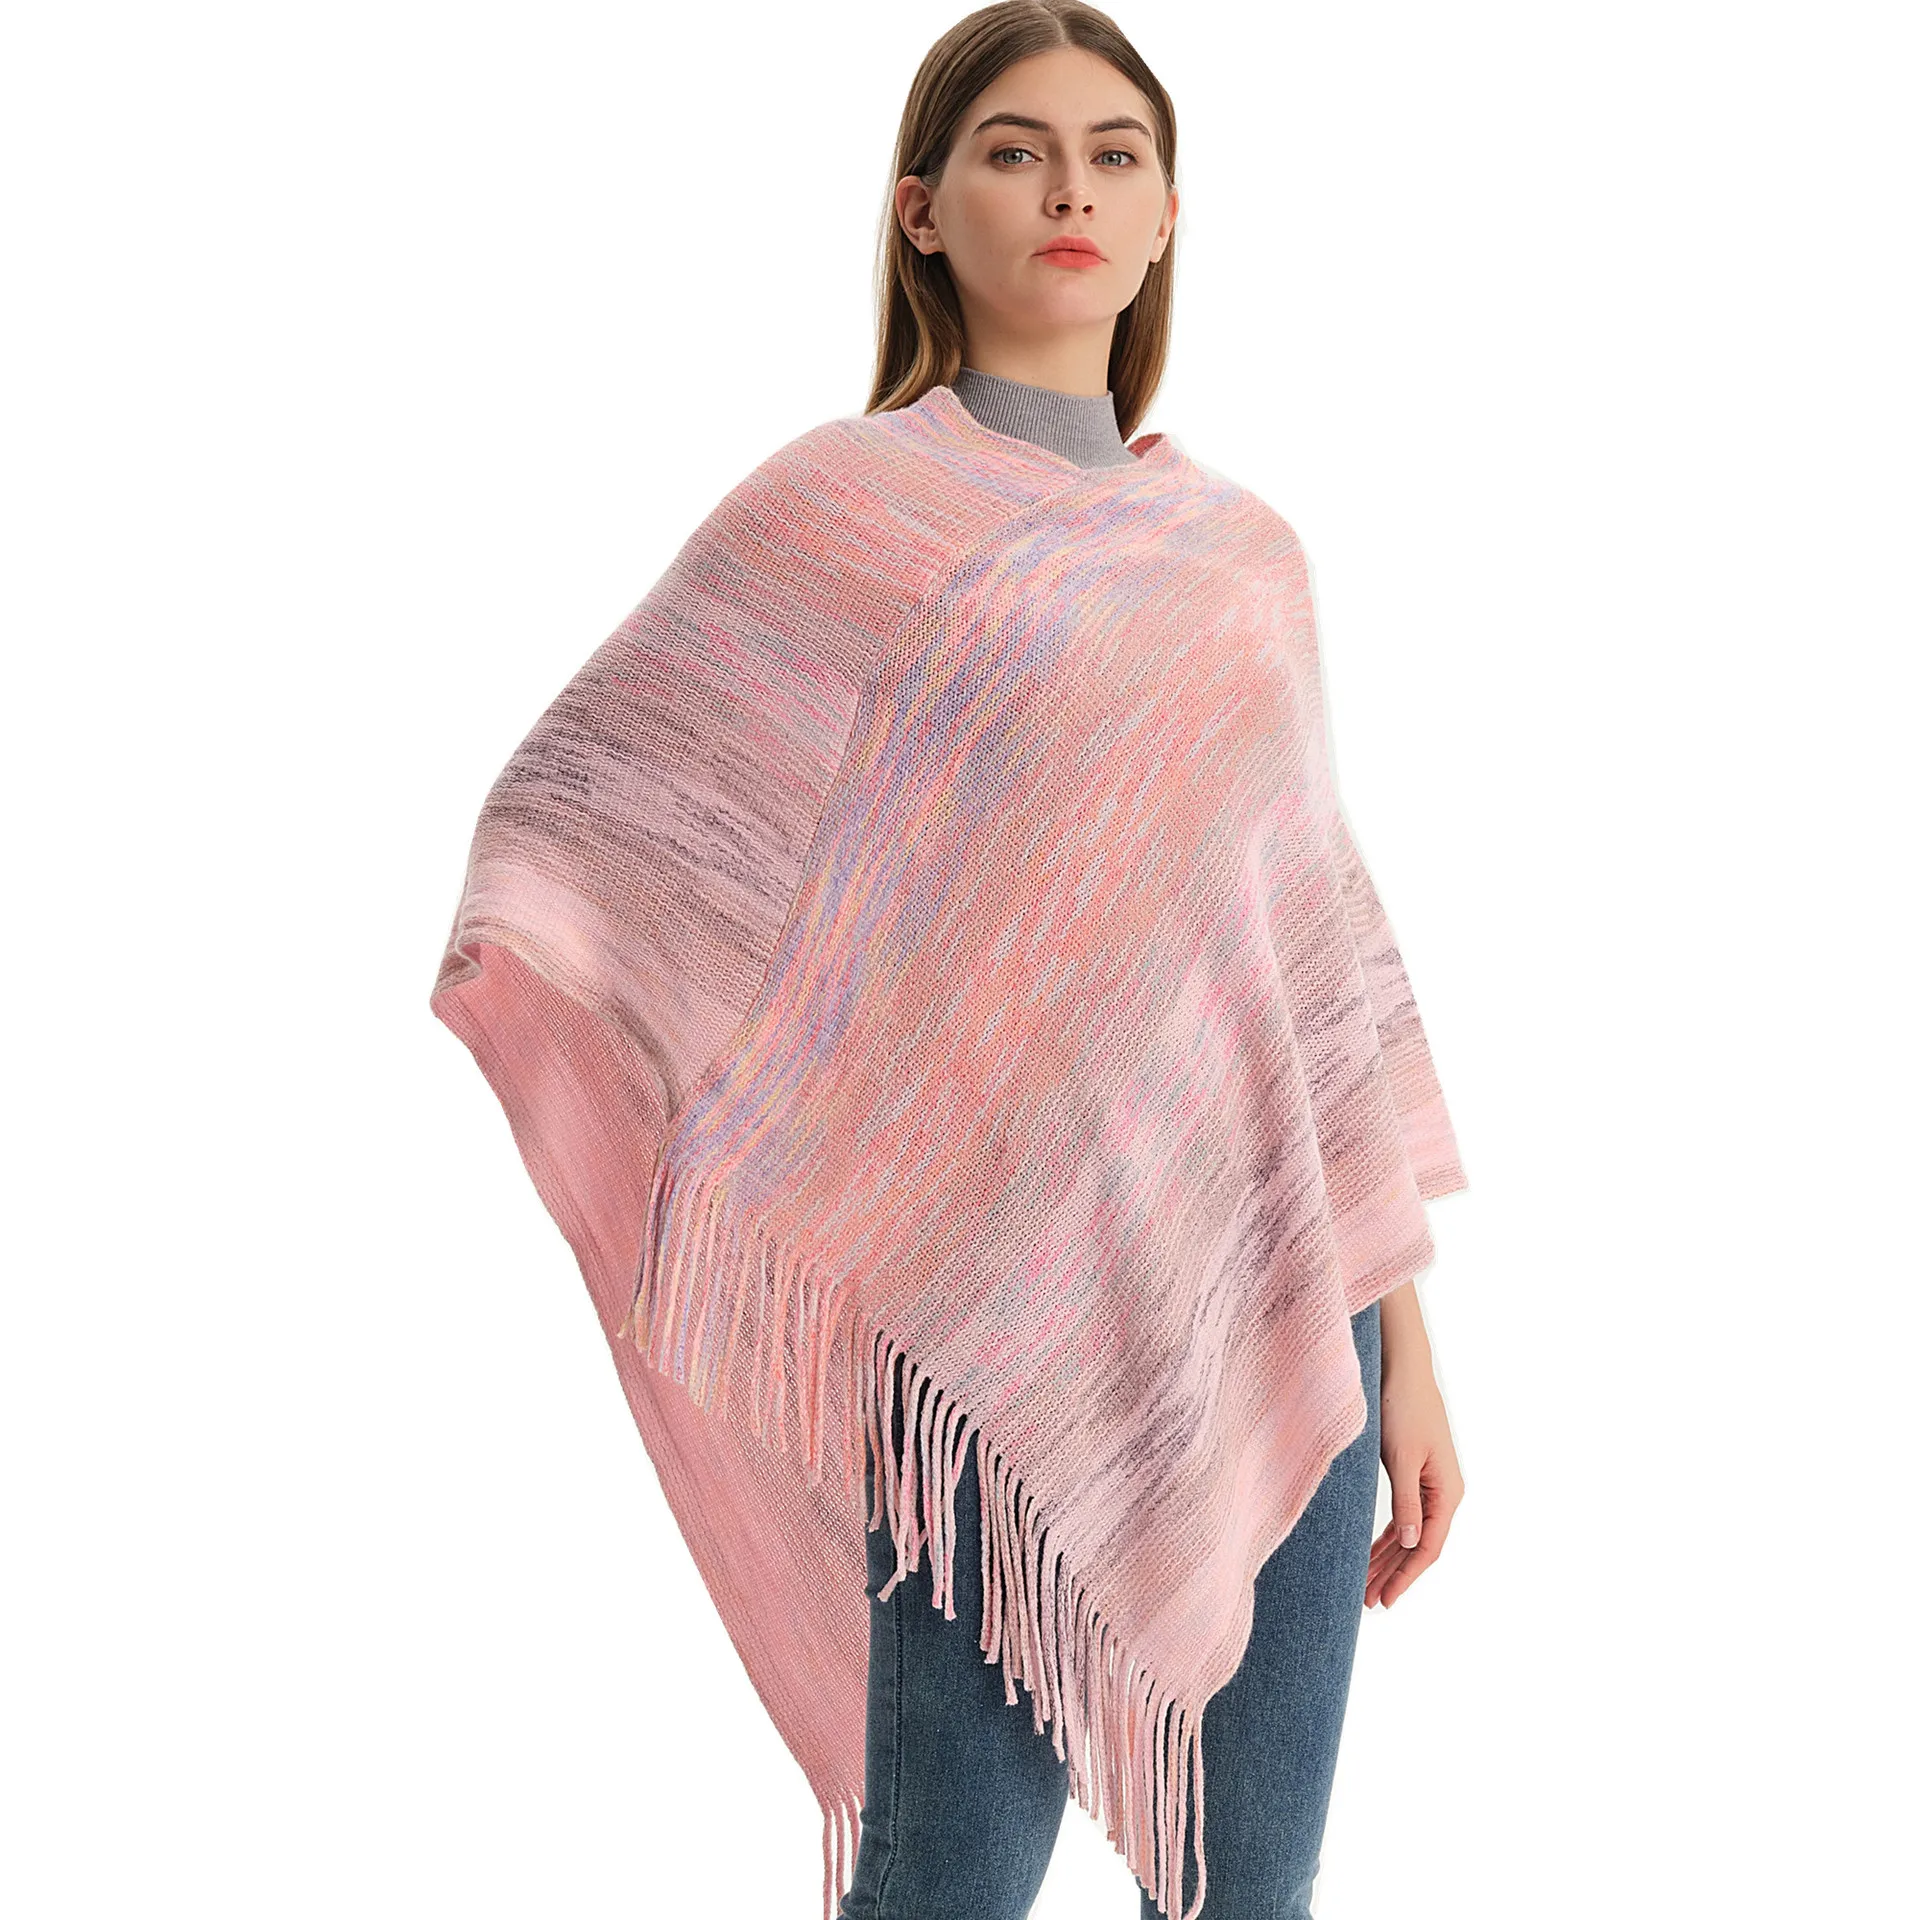 

Winter Fashion Women New V-Neck Pullover Cape Sweater Fringe Knit Shawl Winter Thick Warm Blanket Poncho Scarf Pink Cloak